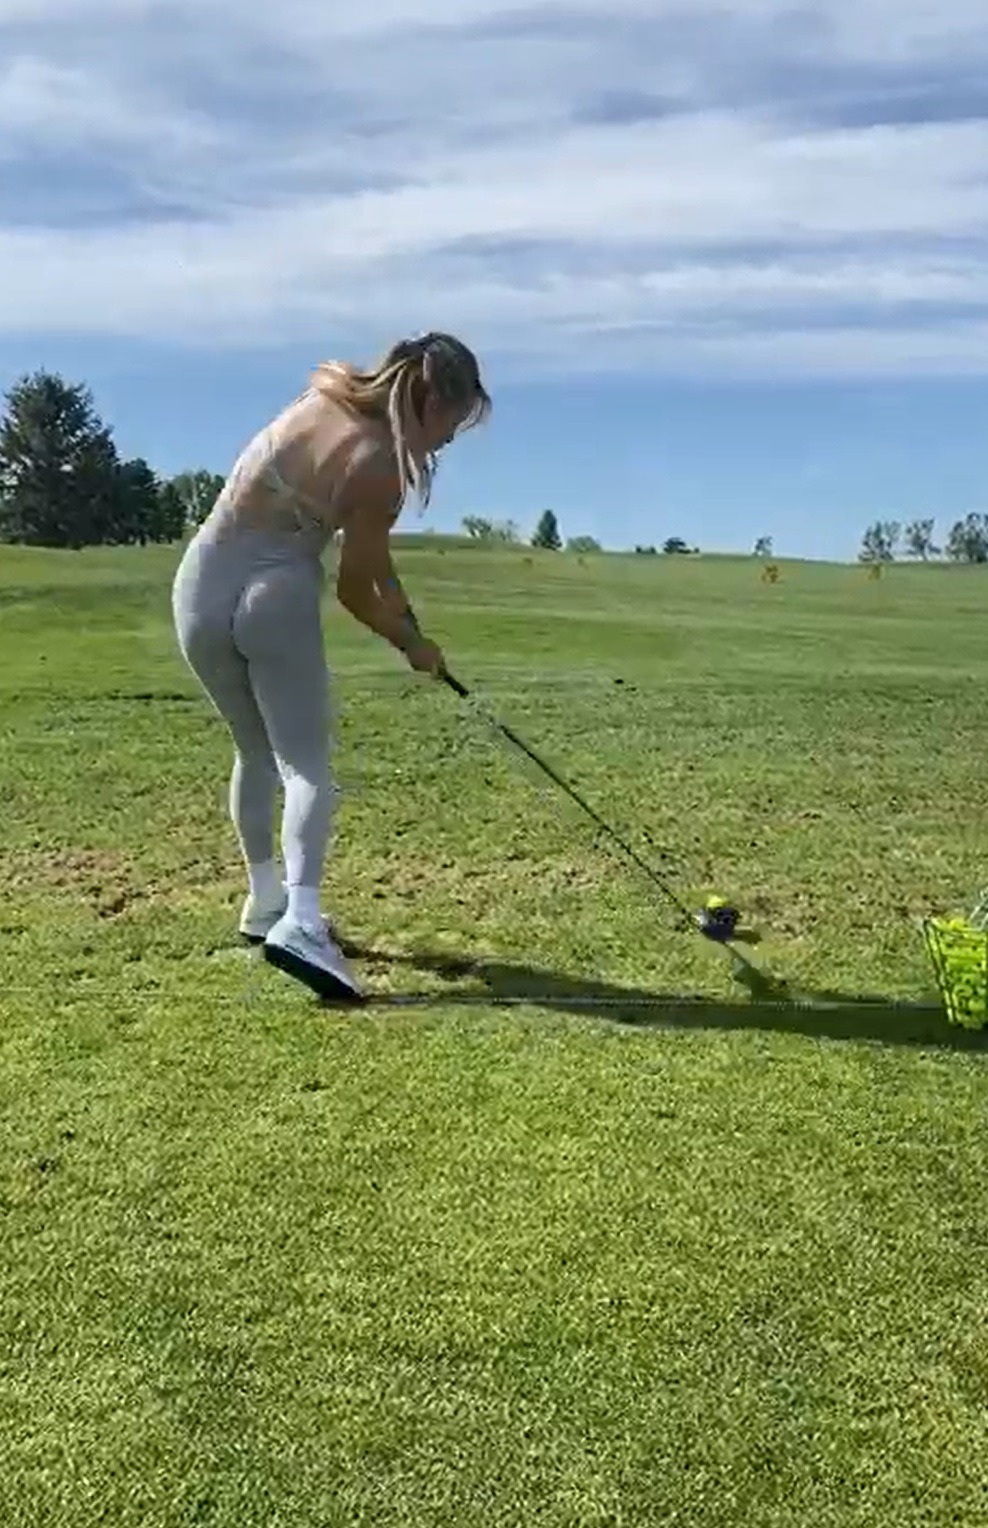 , Paige Spiranac mocks Phil Mickelson with ‘big boobies’ jibe as golf stunner slams players for signing up to LIV Tour